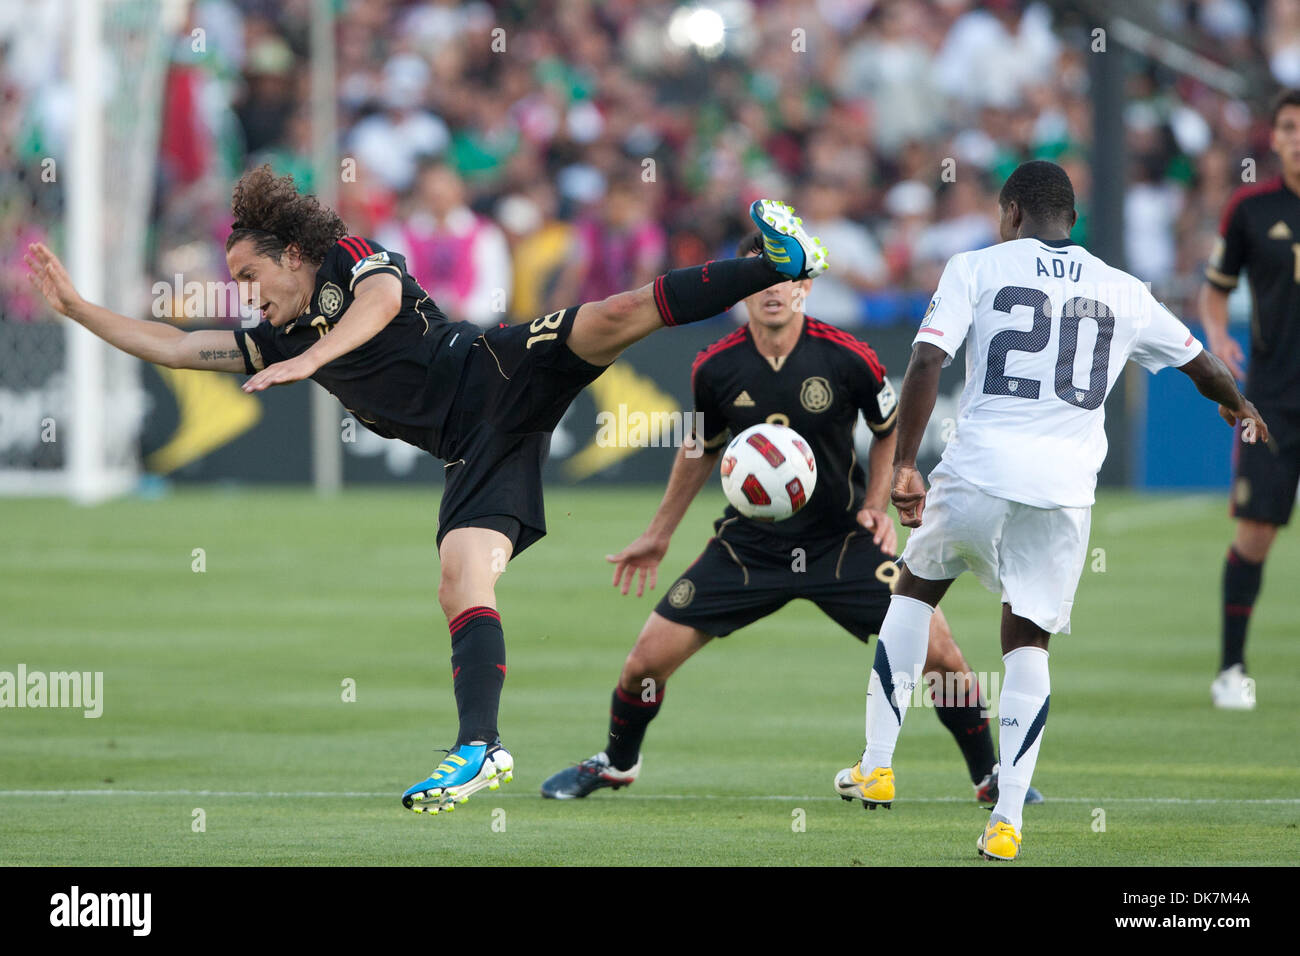 June 25, 2011 - Pasadena, California, U.S - Mexico midfielder Andres Guardado #18 (L) and United States forward Freddy Adu #20 (R) in action during the 2011 CONCACAF Gold Cup championship game between United States and Mexico at a sold out Rose Bowl. Mexico went on to defeat United States with a final score of 4-2. (Credit Image: © Brandon Parry/Southcreek Global/ZUMAPRESS.com) Stock Photo